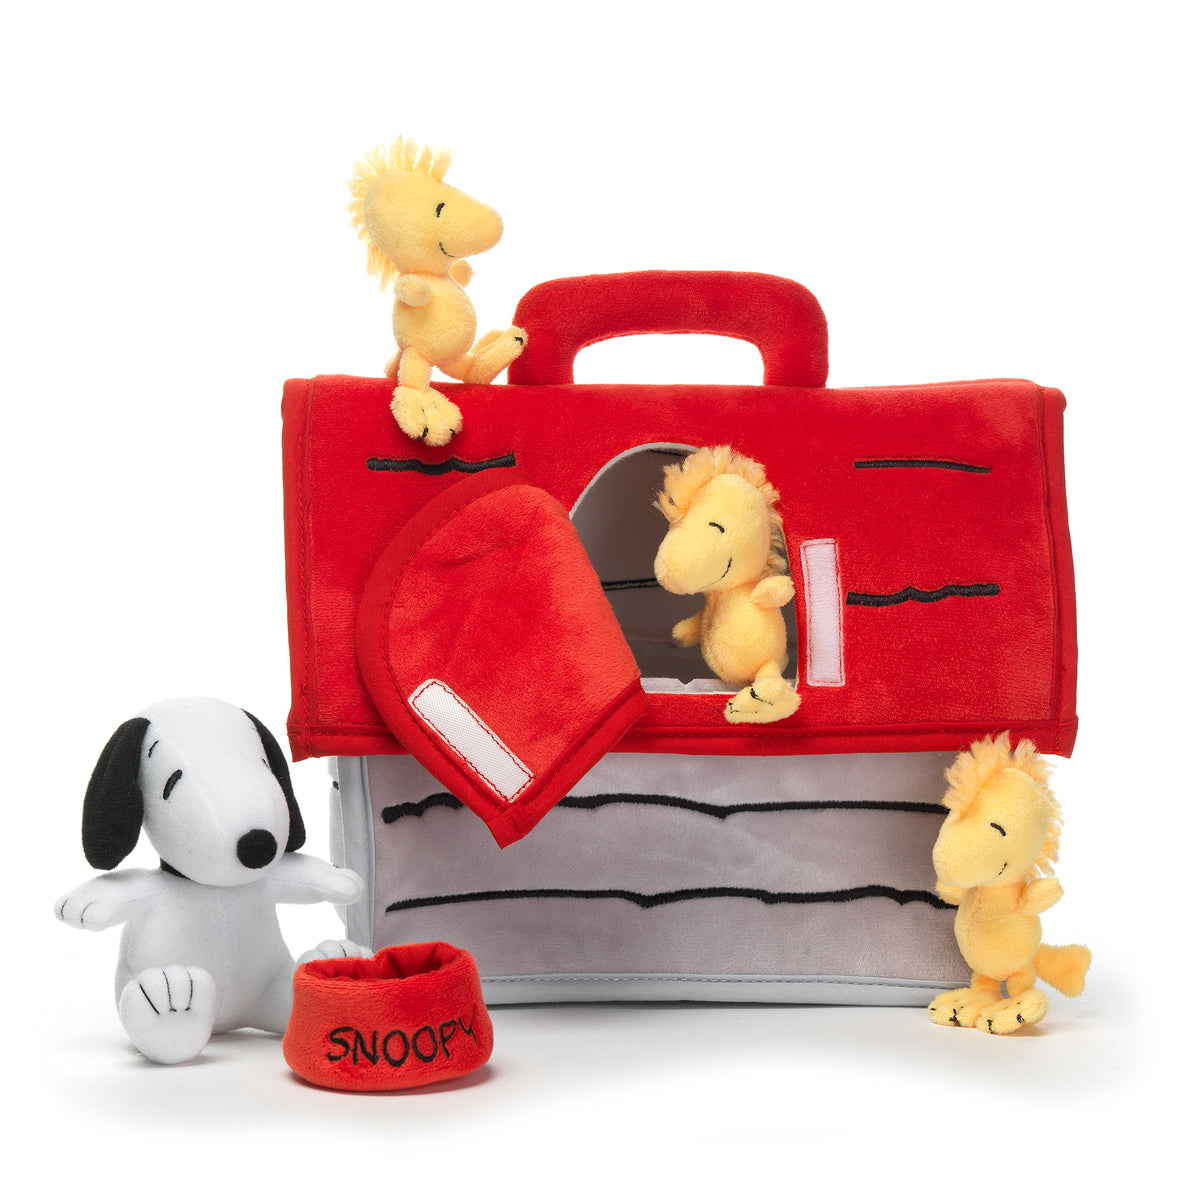 Classic Snoopy Interactive Plush Doghouse with 5 Stuffed Animal